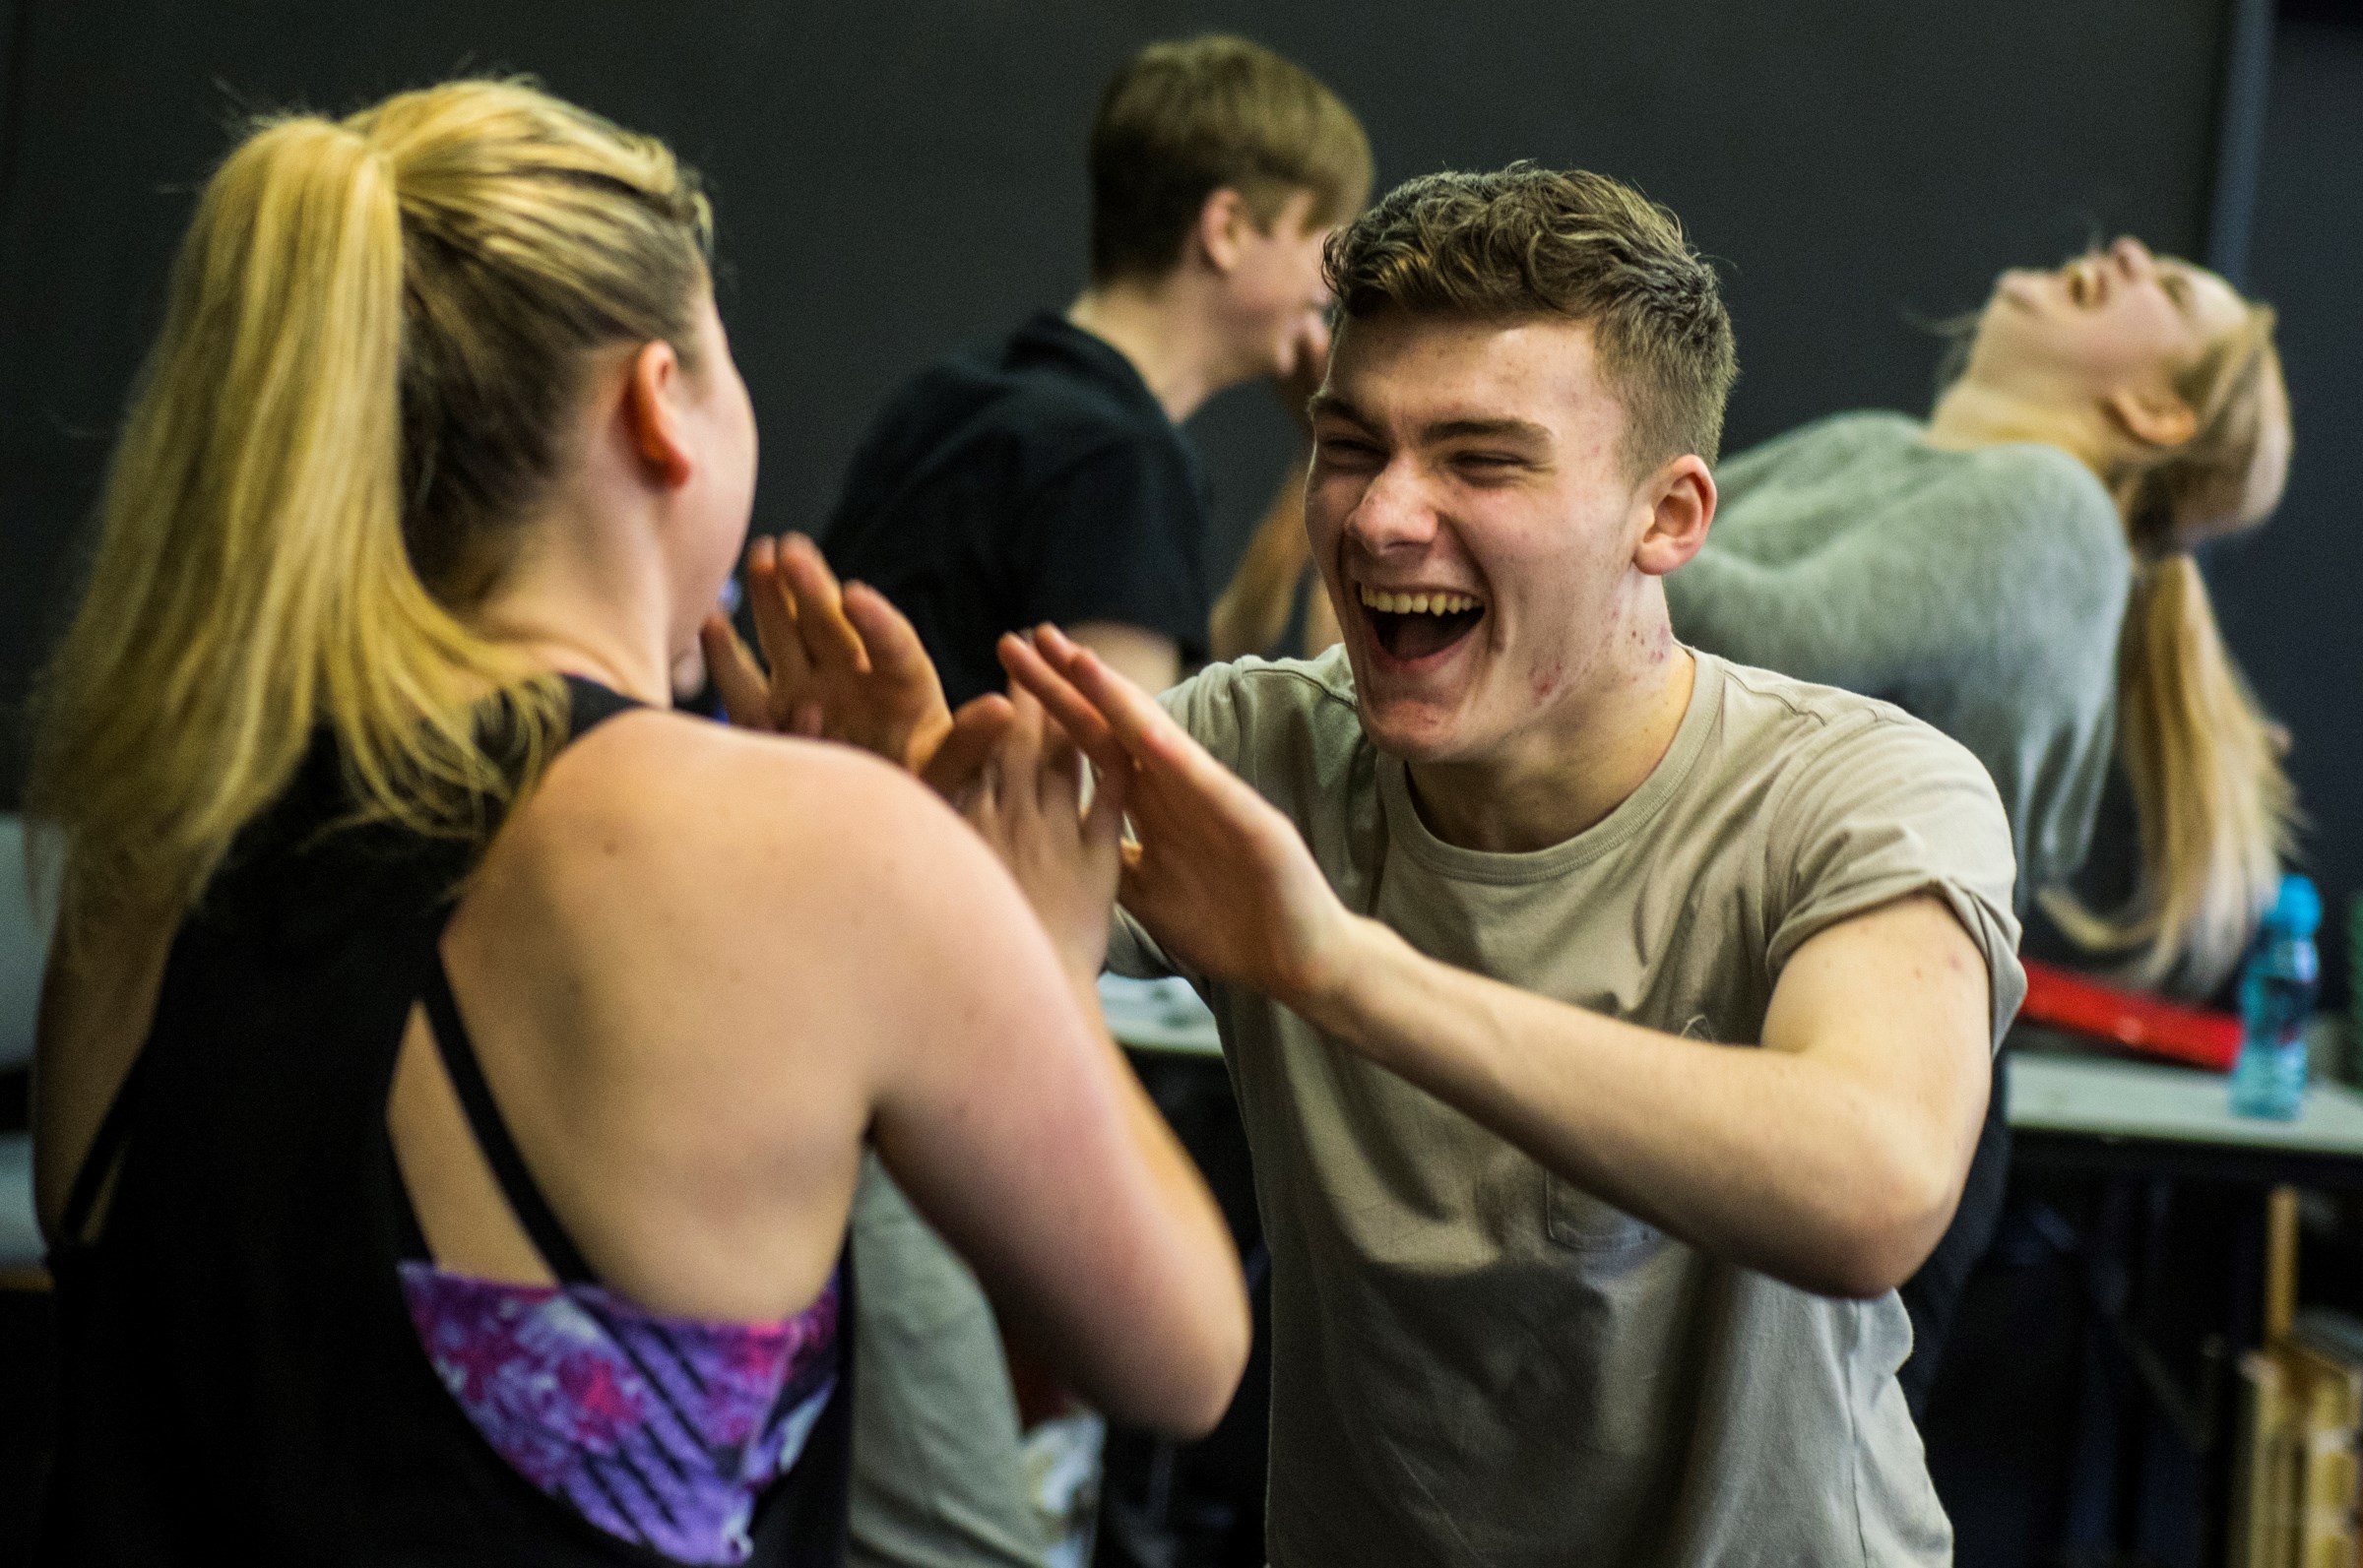 Frantic Assembly movement workshop at the King's Theatre February 2017 Photo by Phil Wilkinson.JPG